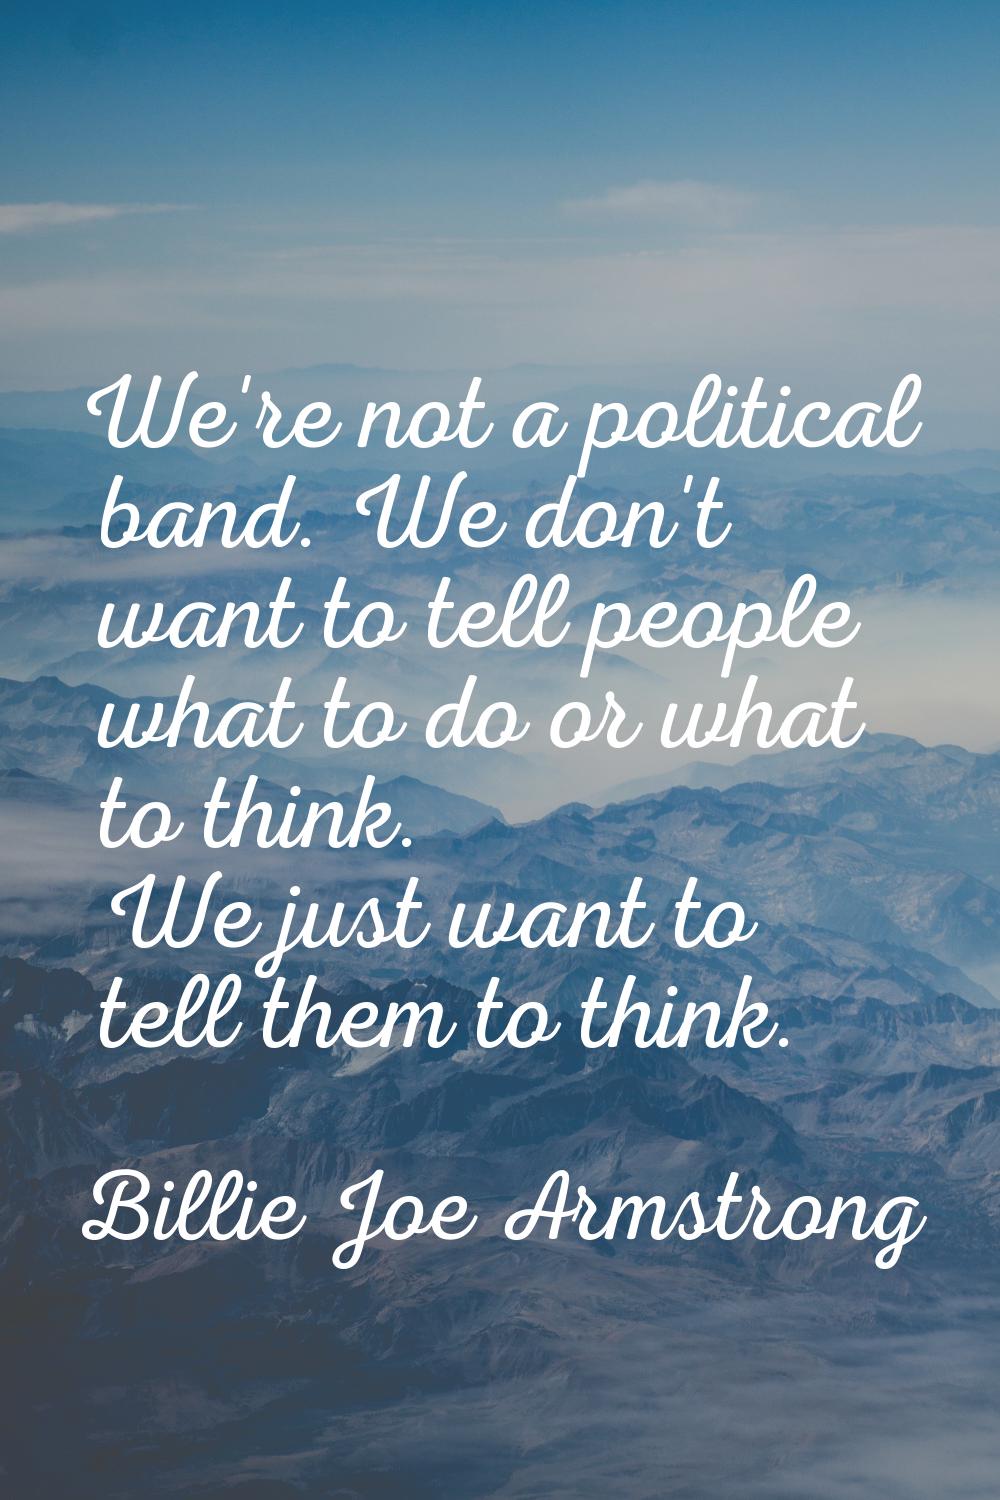 We're not a political band. We don't want to tell people what to do or what to think. We just want 